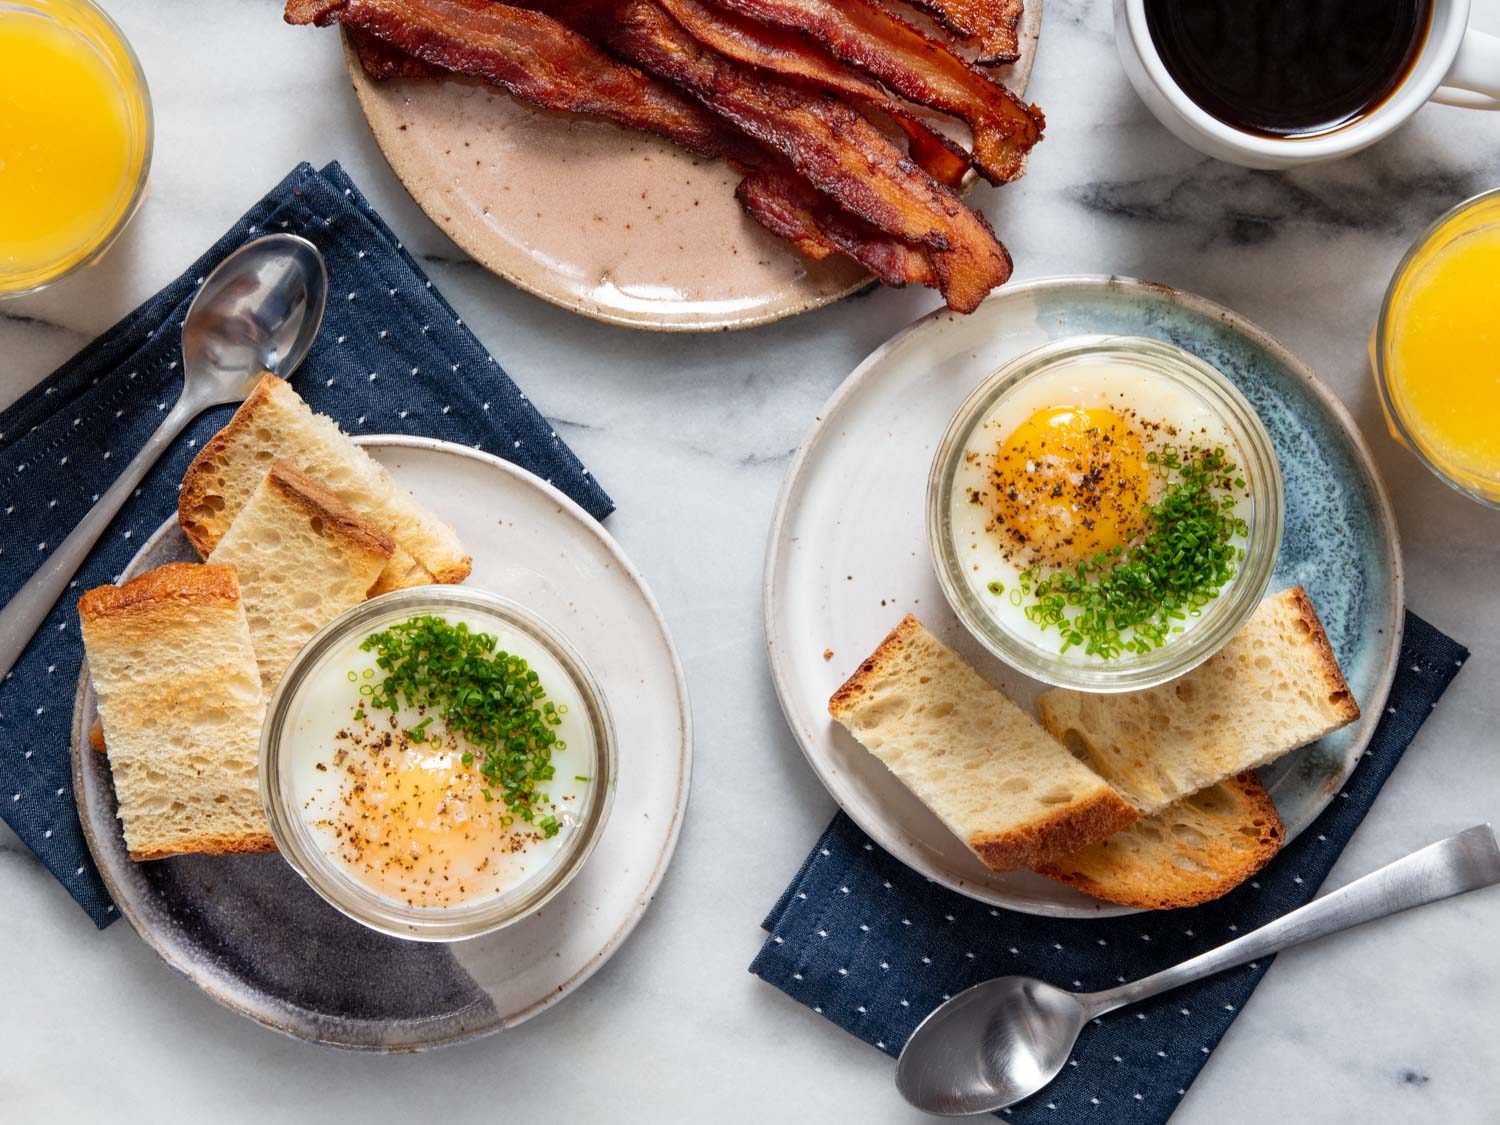 Overhead of two potato-egg jars on plates with toast, and a plate of bacon in the background, along with a glasses of orange juice and a cup of coffee.